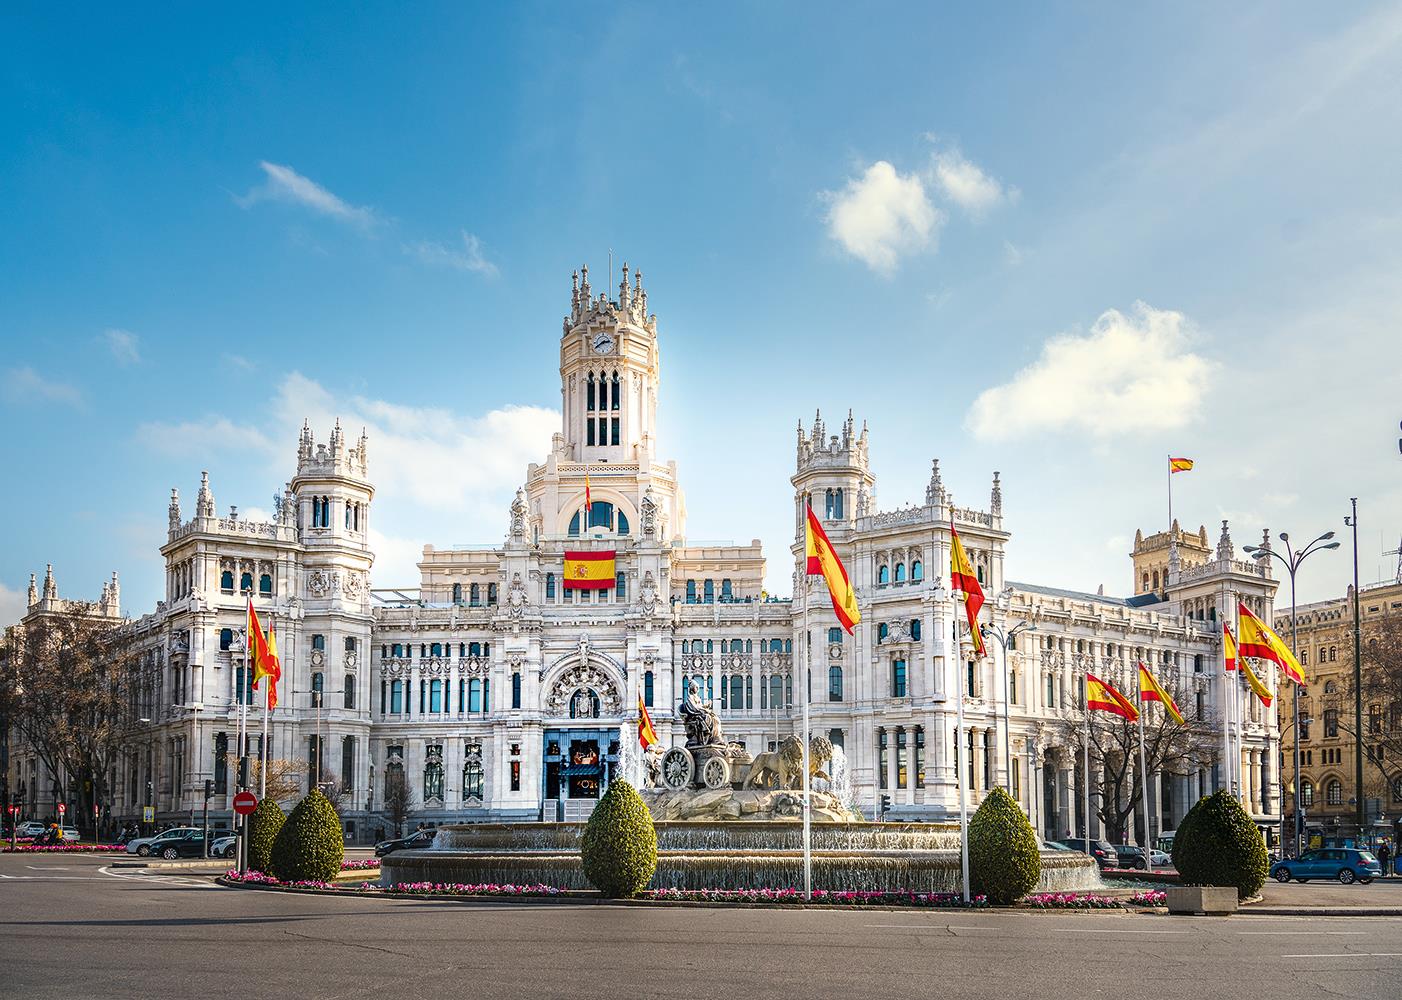 Alipson Madrid Jigsaw Puzzle (1000 Pieces)